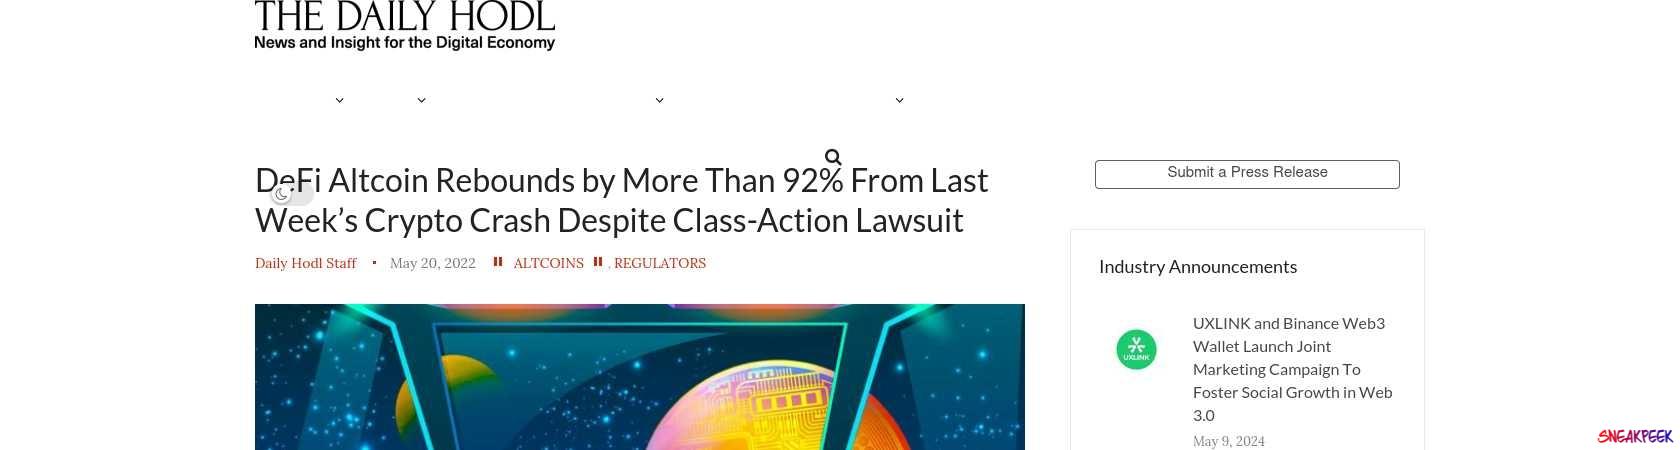 Read the full Article:  ⭲ DeFi Altcoin Rebounds by More Than 92% From Last Week’s Crypto Crash Despite Class-Action Lawsuit